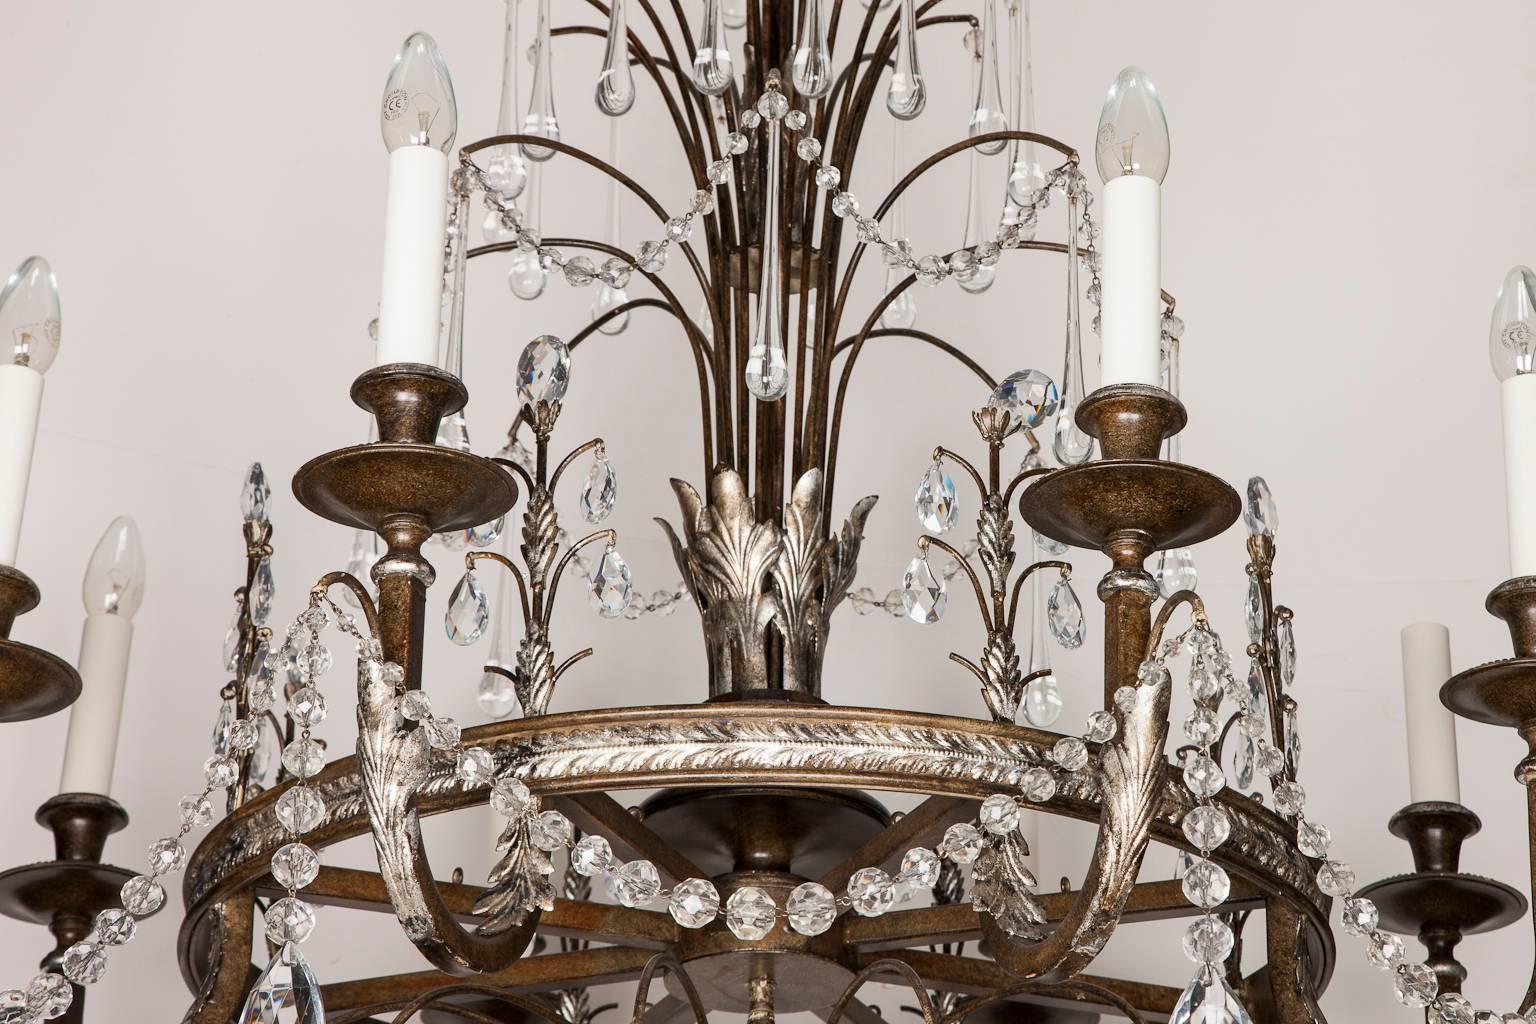 An eight light Swedish style, silver-leaf and bronze chandelier draped in glass tear drops, pear drops and glass beads, circa 1980s.